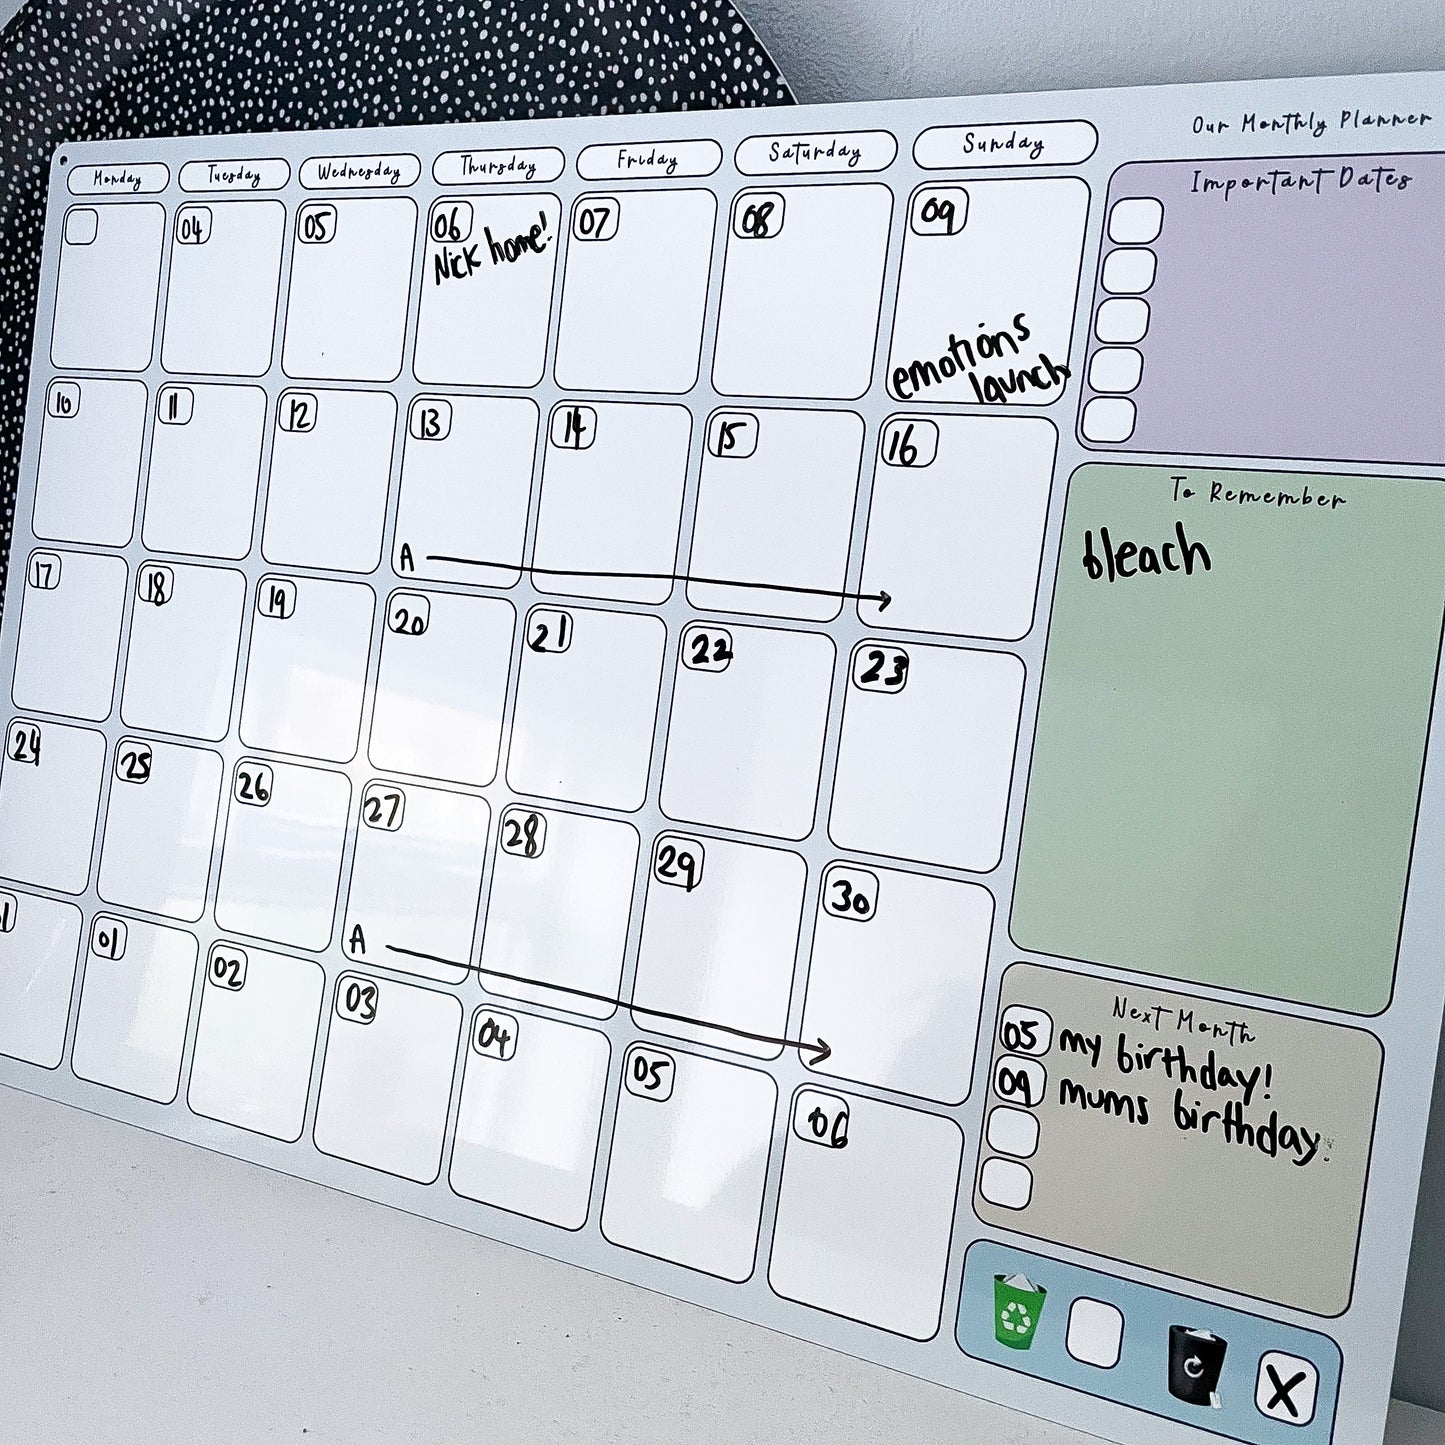 Monthly Planner Whiteboard